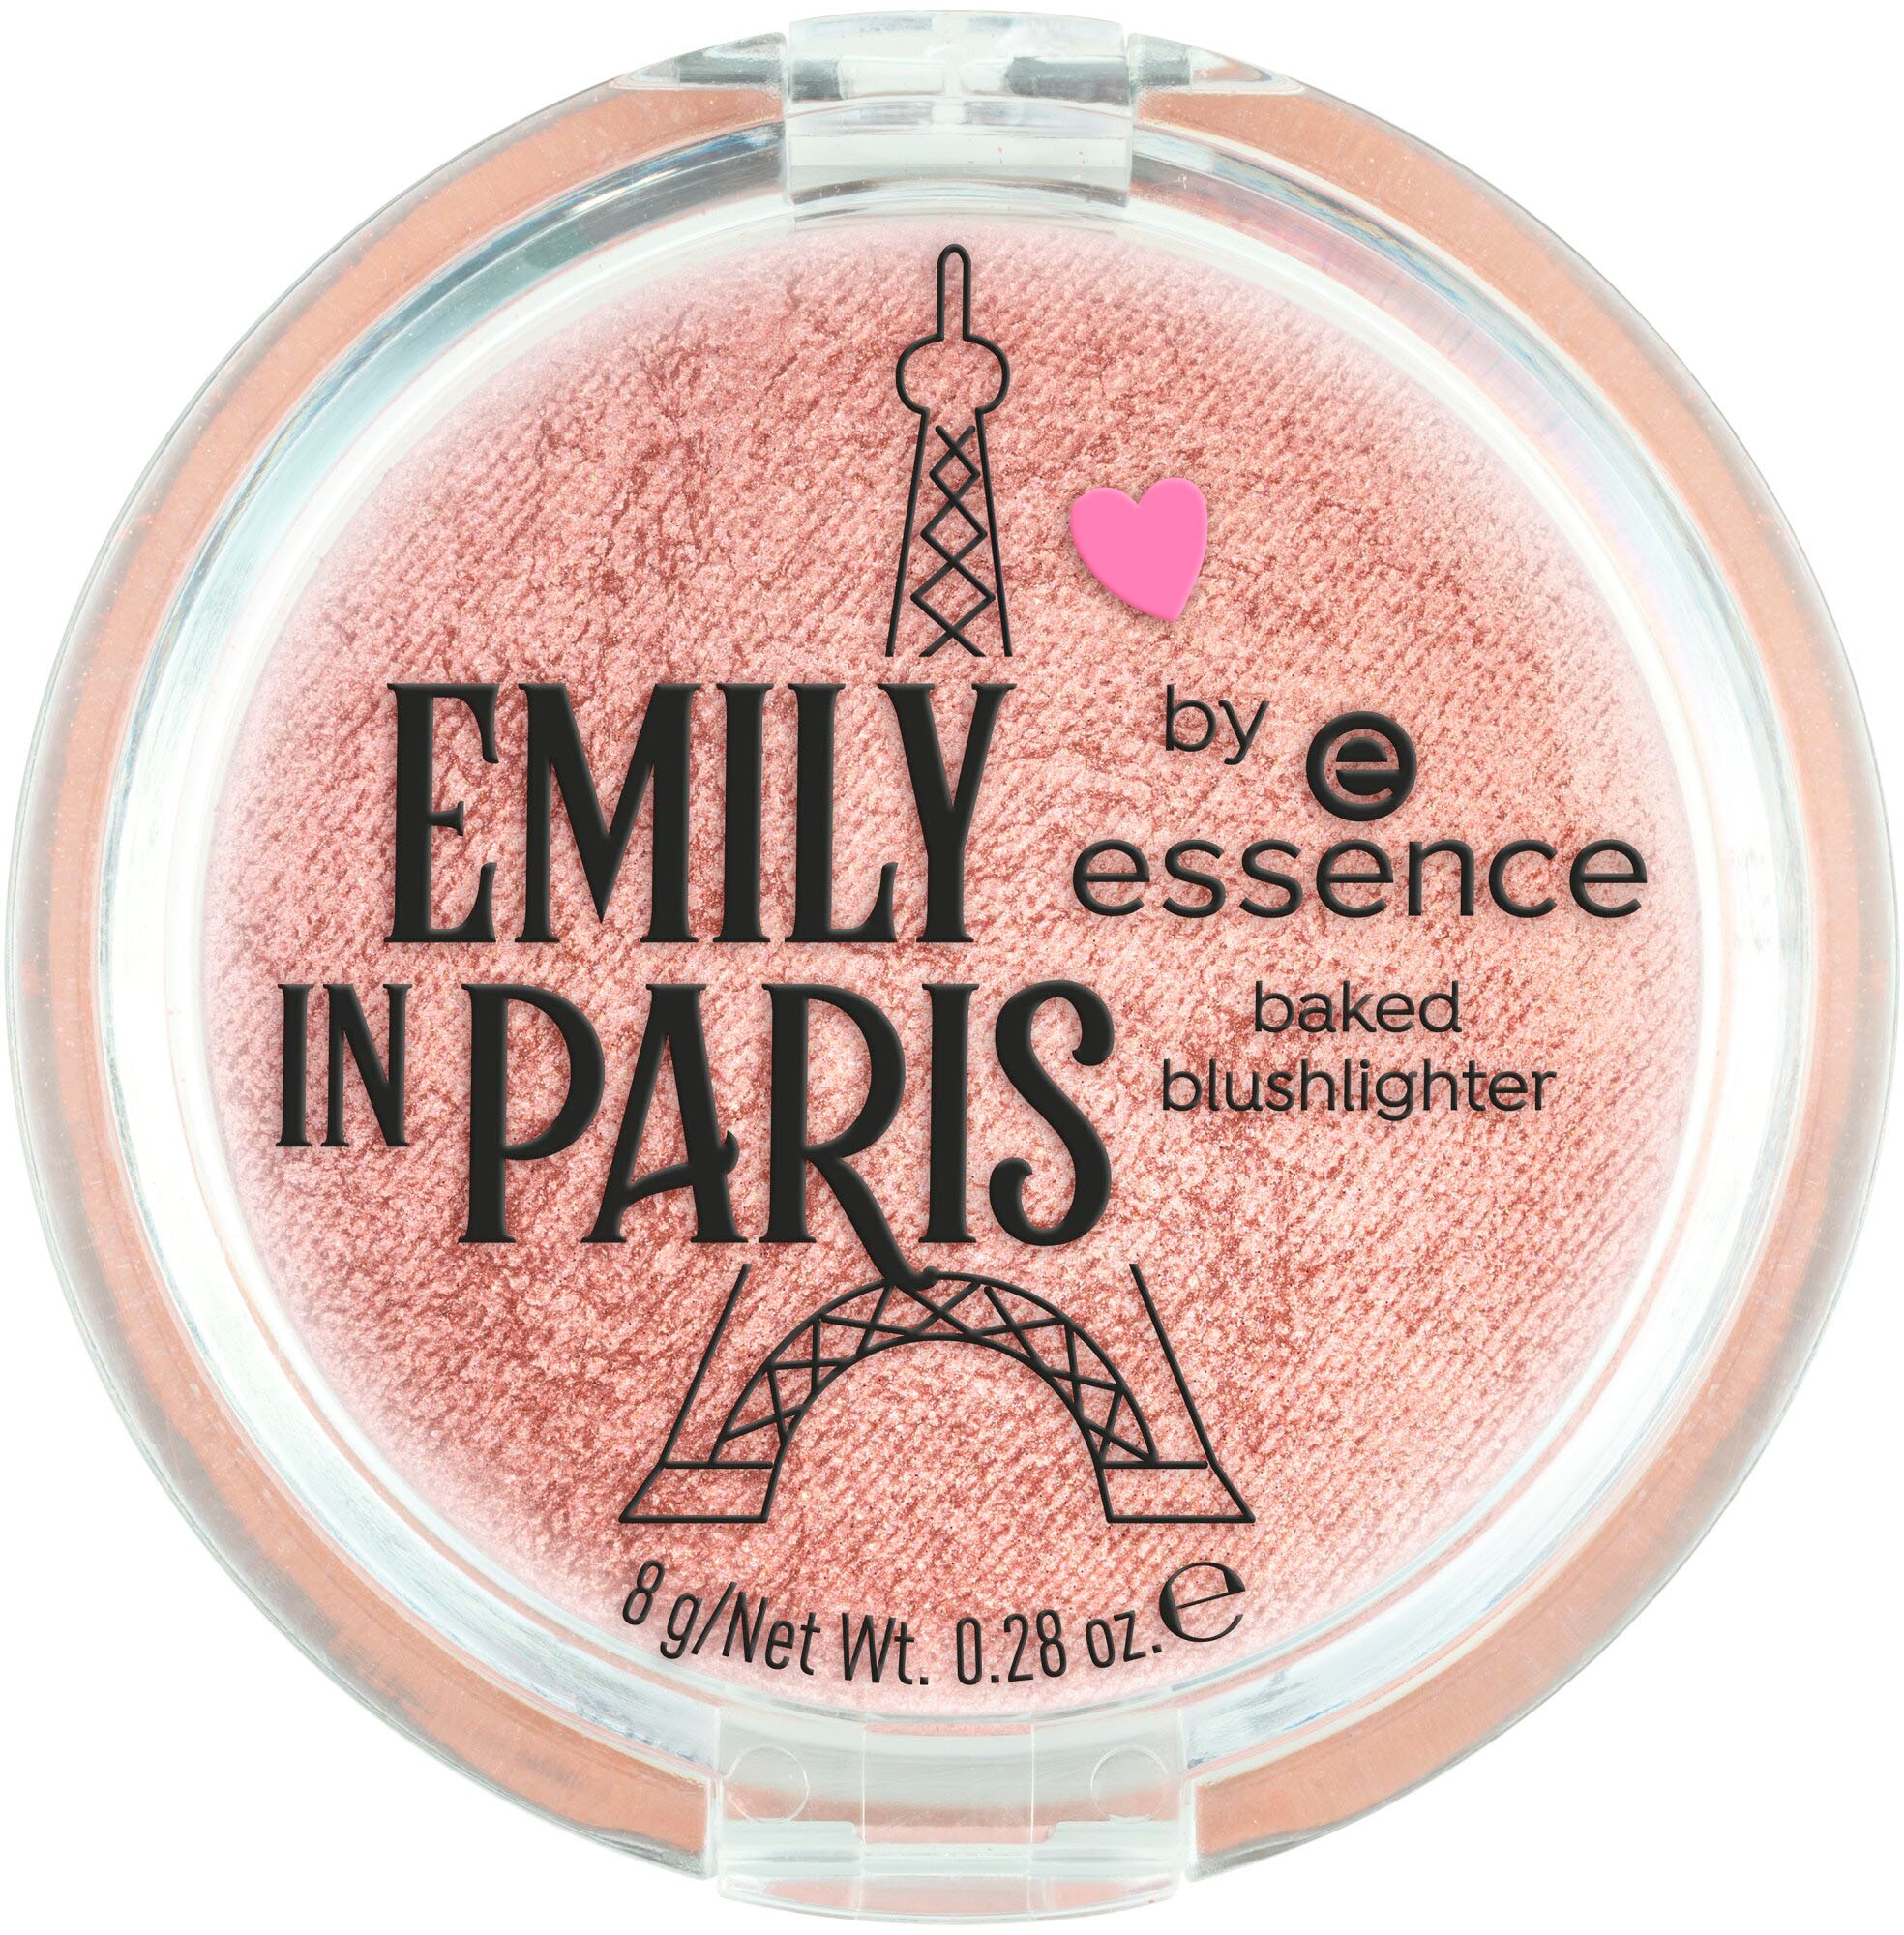 IN Rouge essence online »EMILY blushlighter« PARIS bei Essence by baked